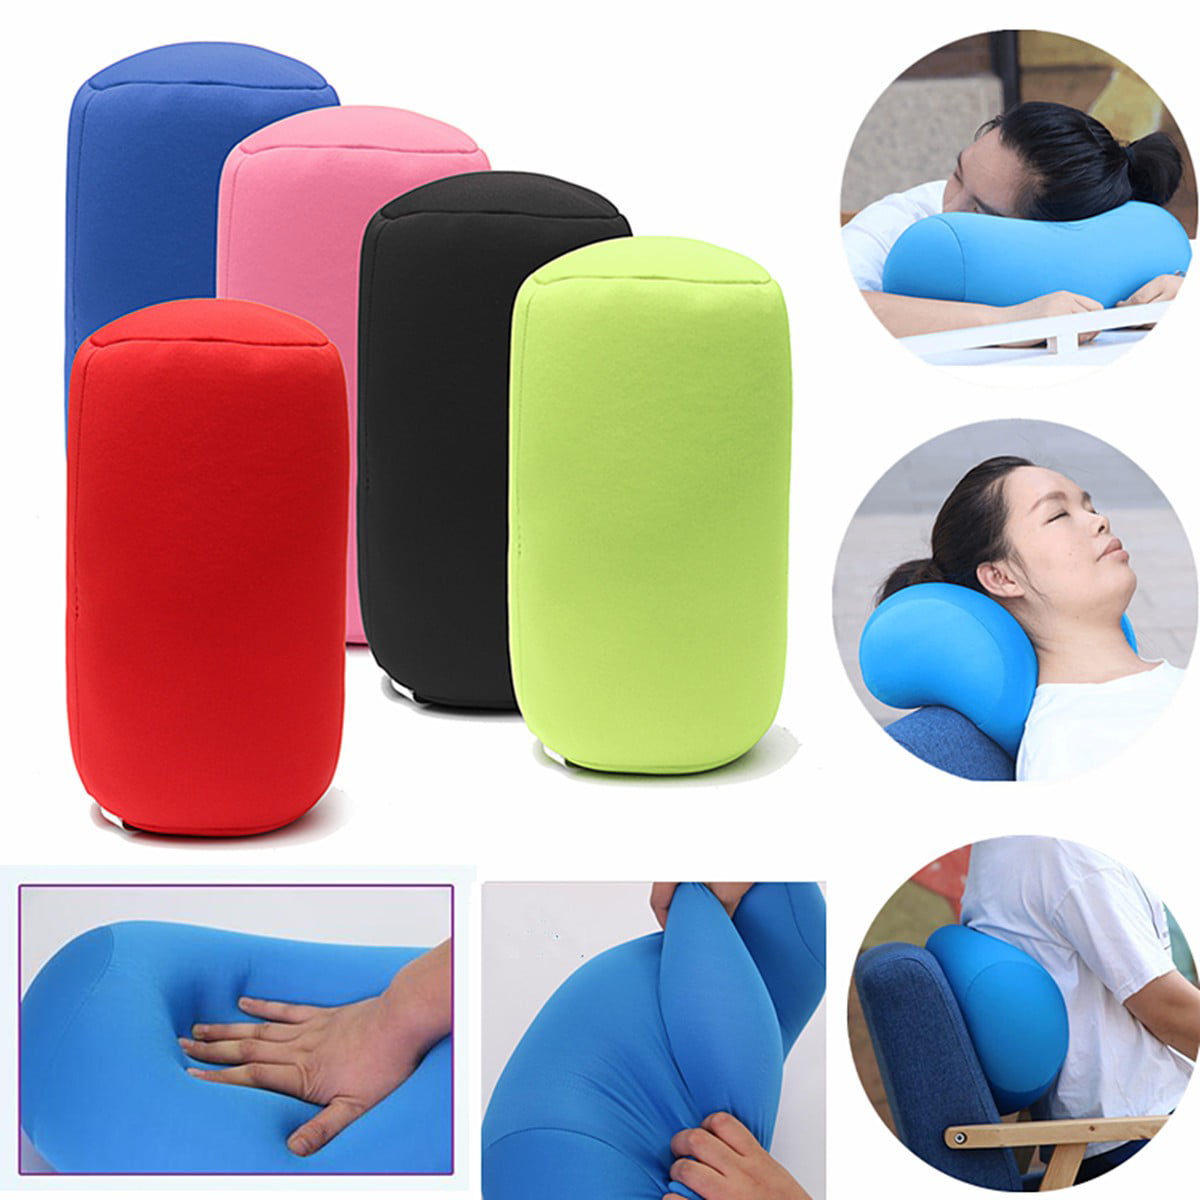 Bookishbunny Micro bead Roll Bed Chair Car Cushion Neck Head Soft Support Back Pillow Black White